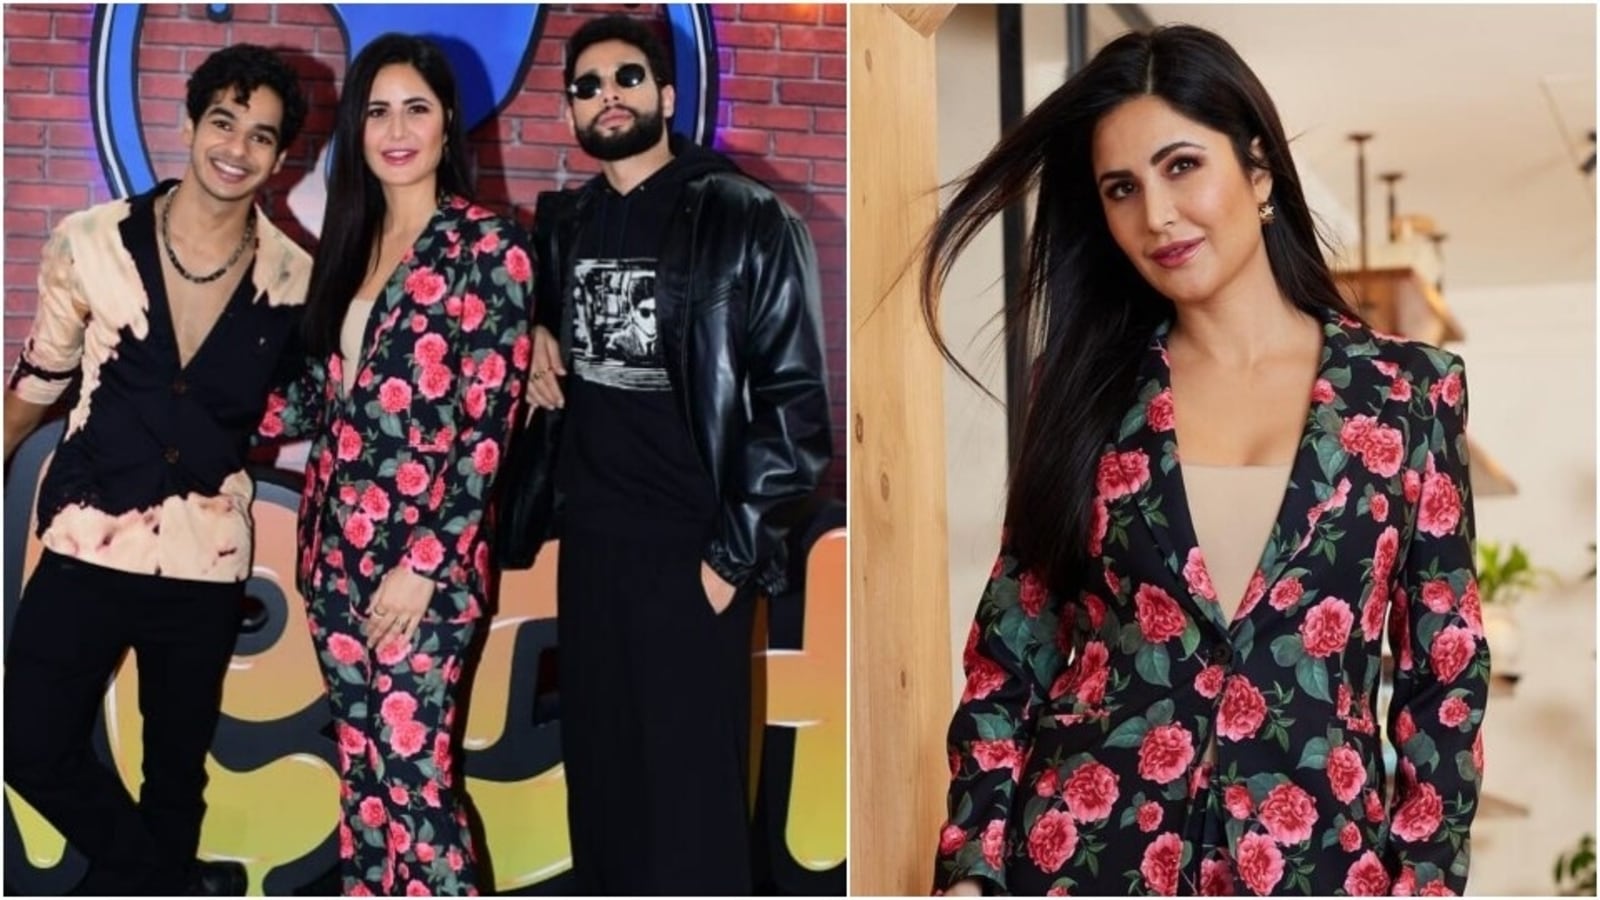 katrina-kaif-with-siddhant-chaturvedi-and-ishaan-khatter-attends-phone-bhoot-trailer-launch-in-chic-powersuit-see-pics